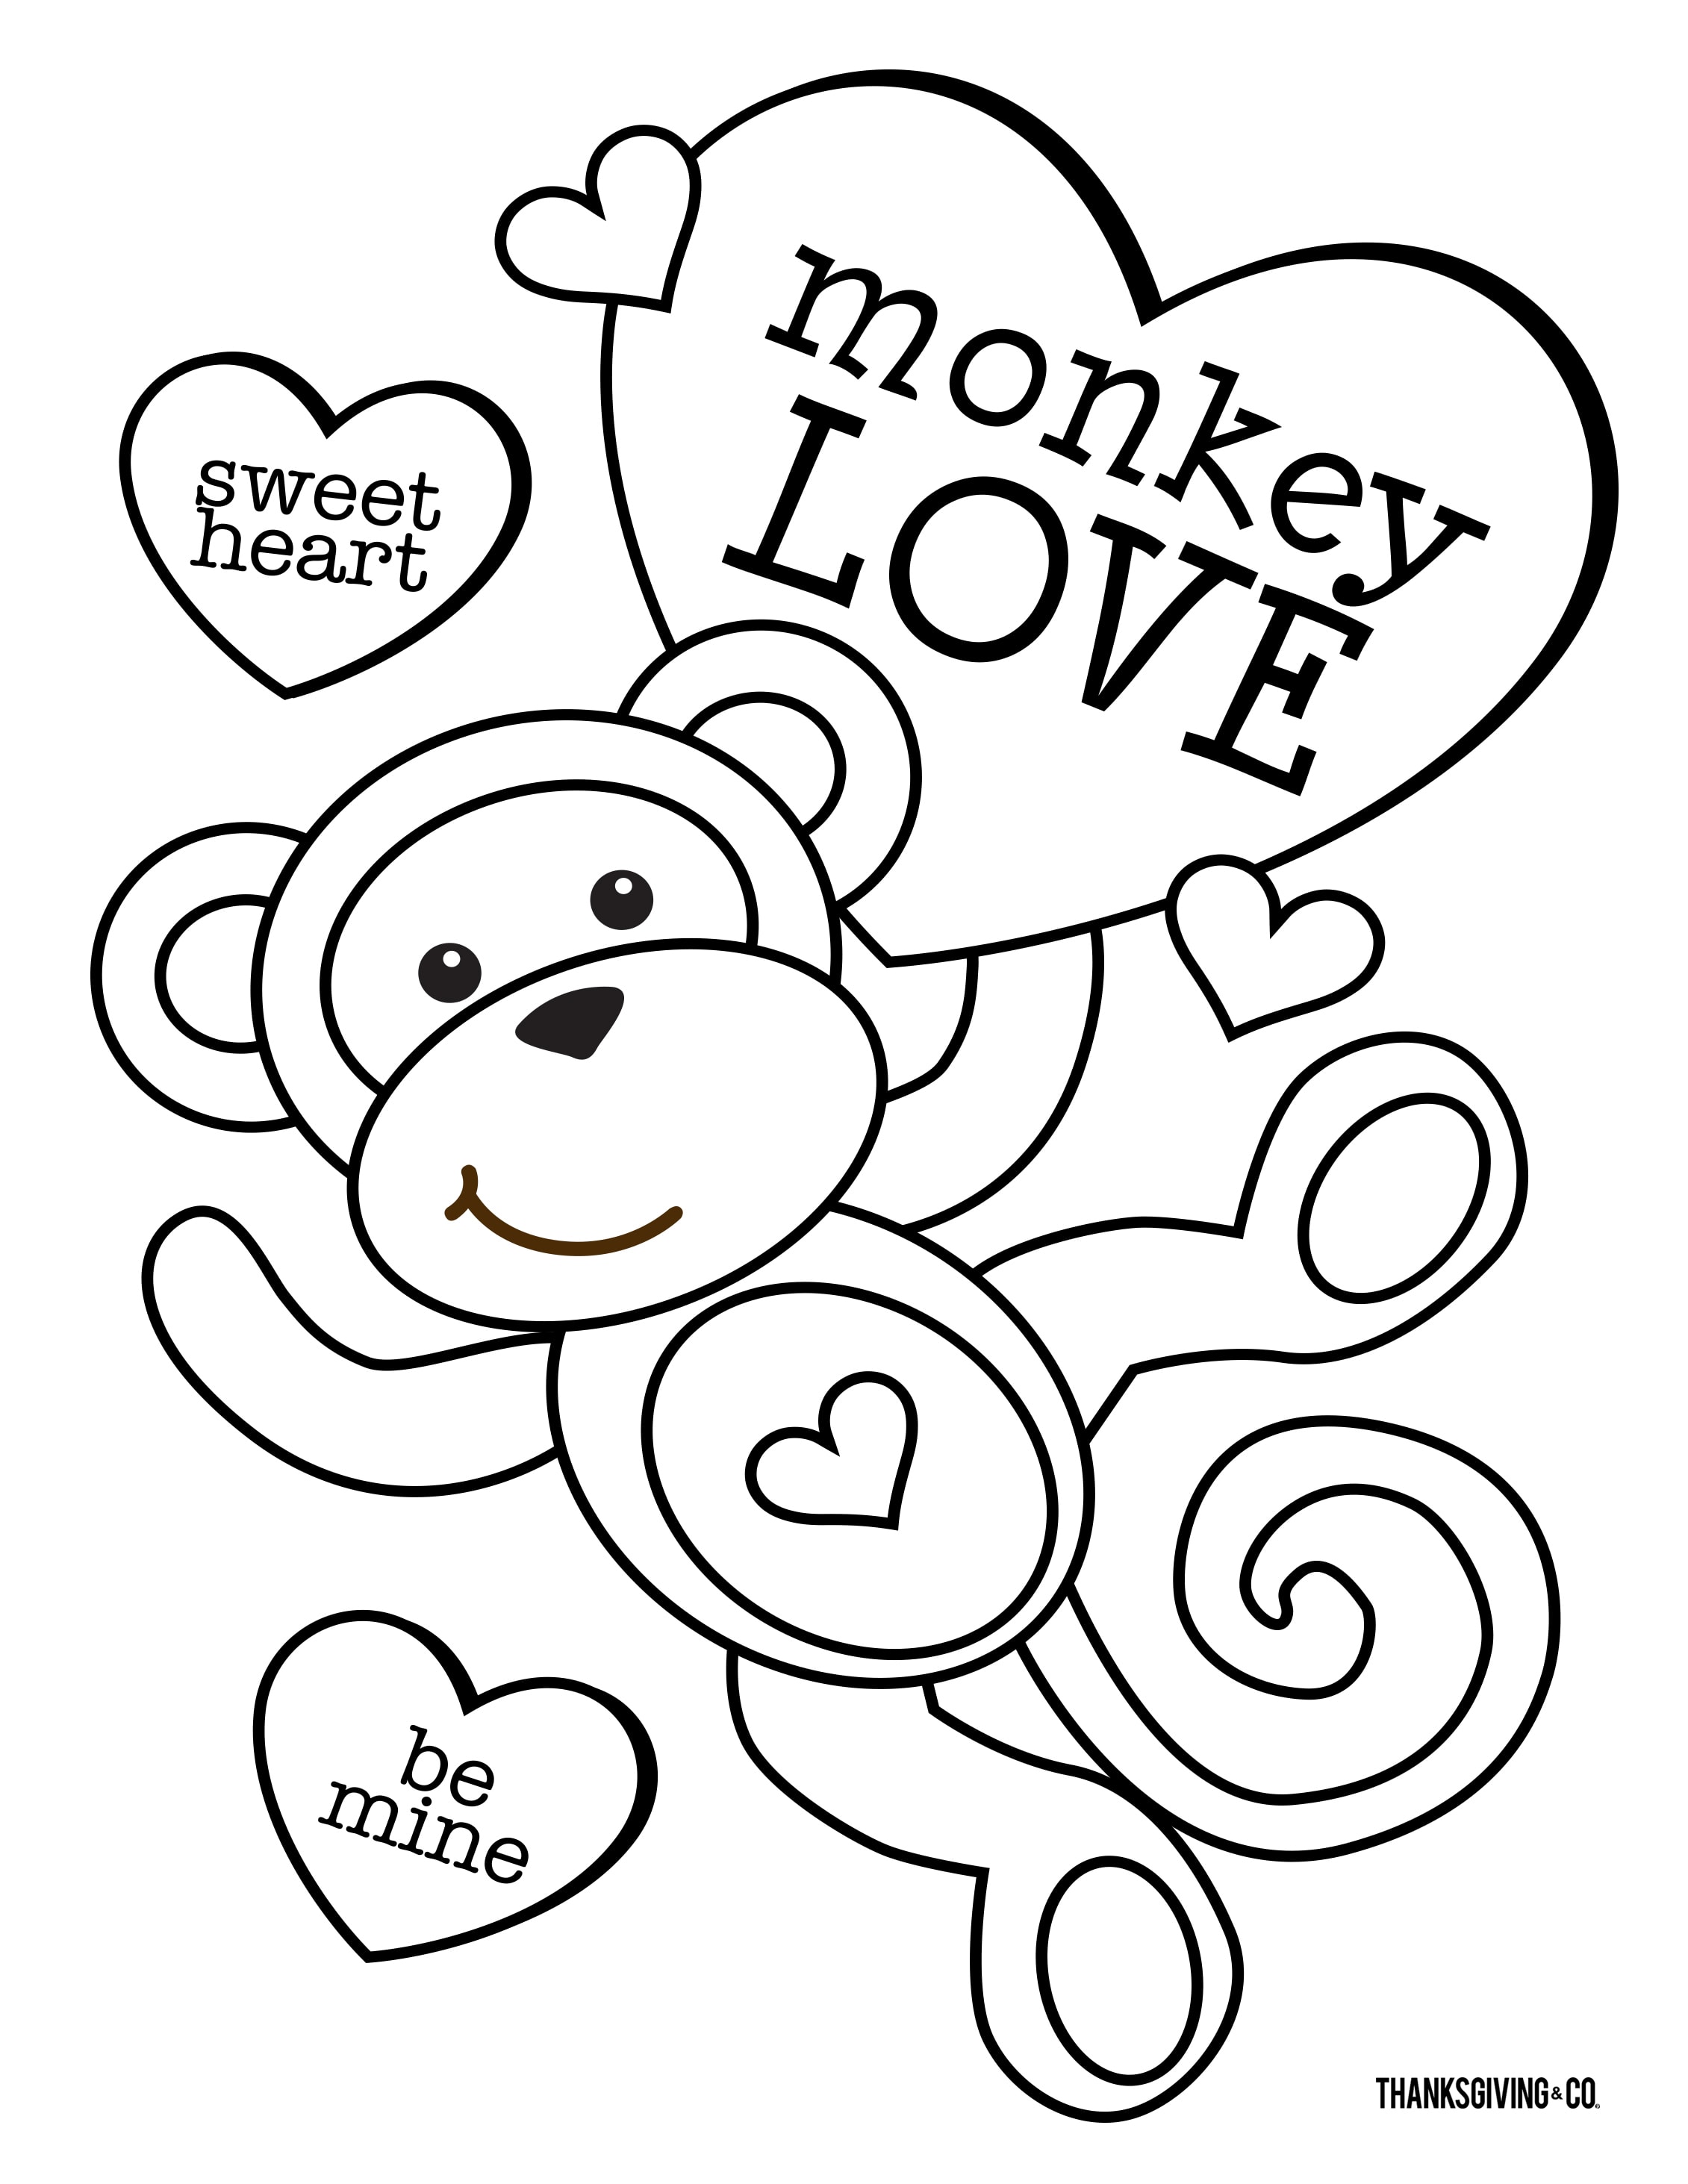 Sweet Heart Monkey Love Coloring Page